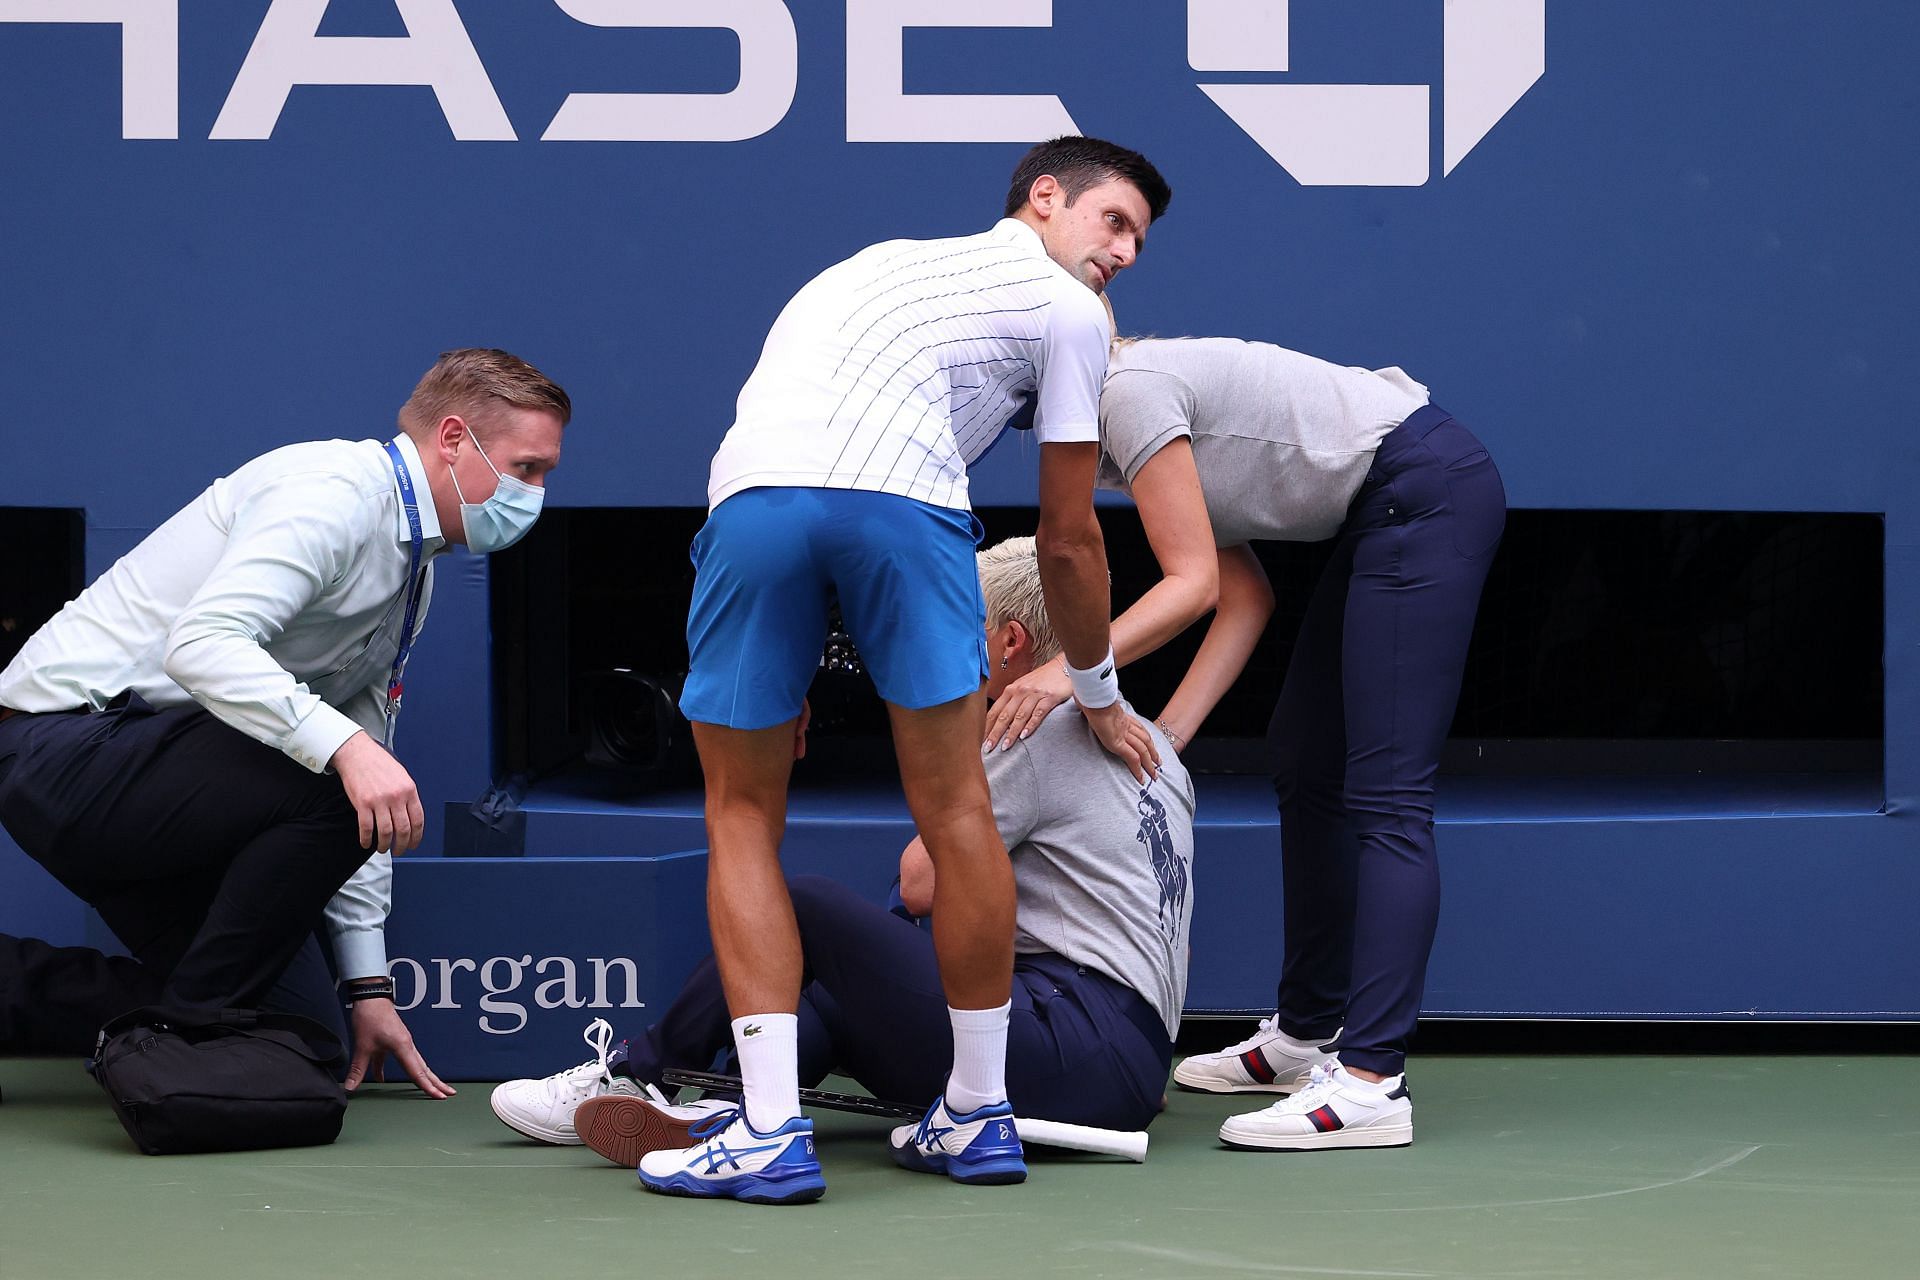 Novak Djokovic recalled his own expulsion from the 2020 US Open